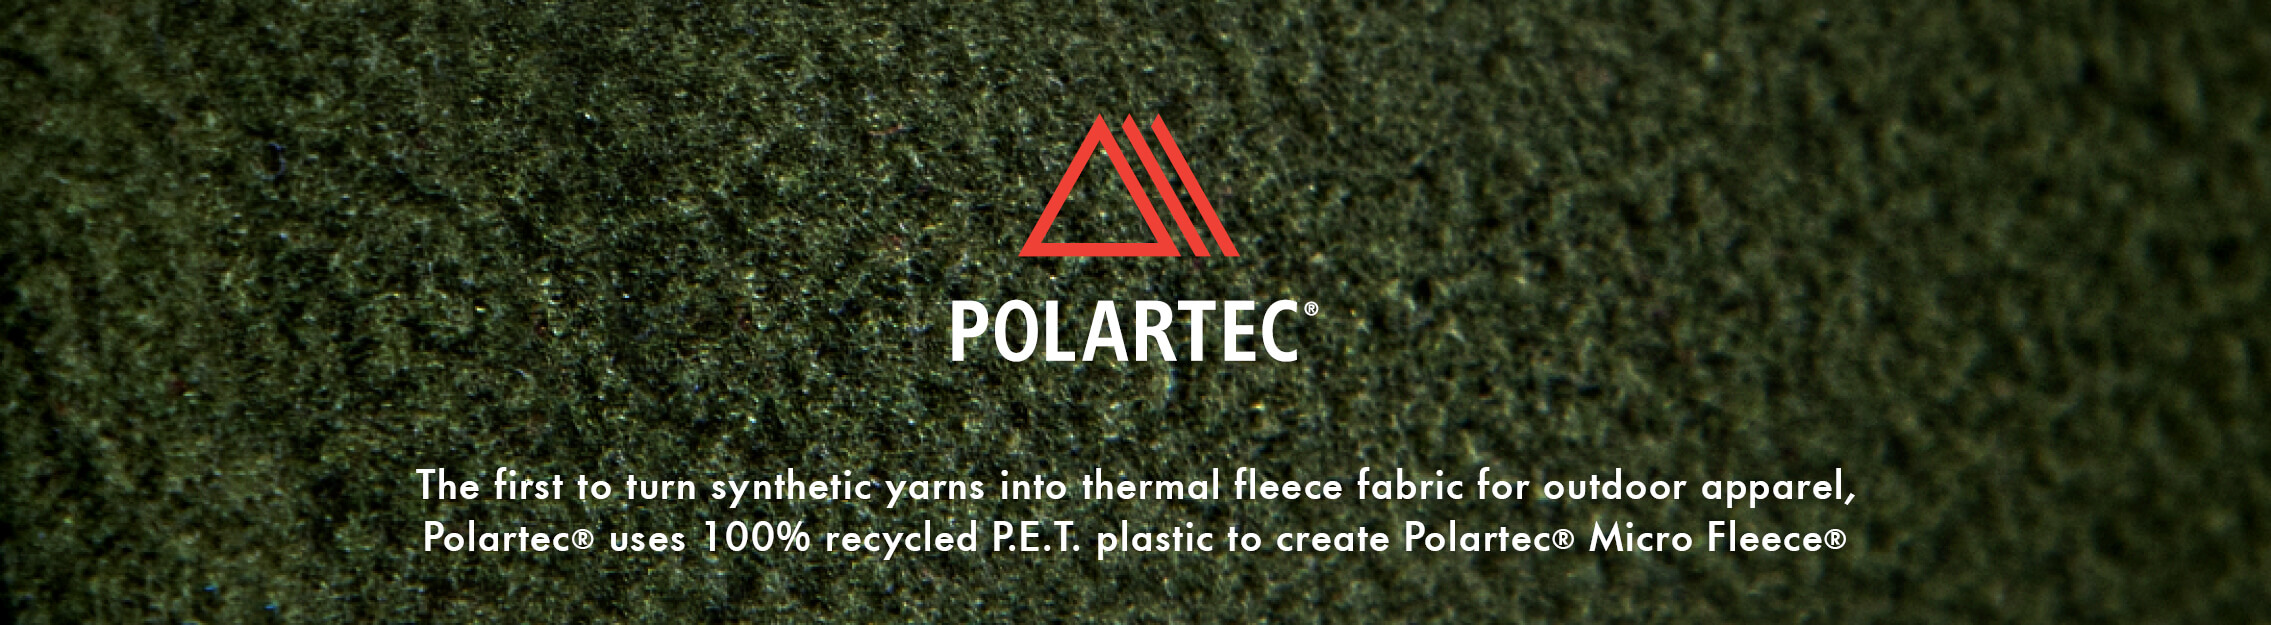 Polartec, the first to create synthetic yarns into thermal fleece fabric for outdoor apparel, Polartec is committed to using 100% Recycled P.E.T. Plastics